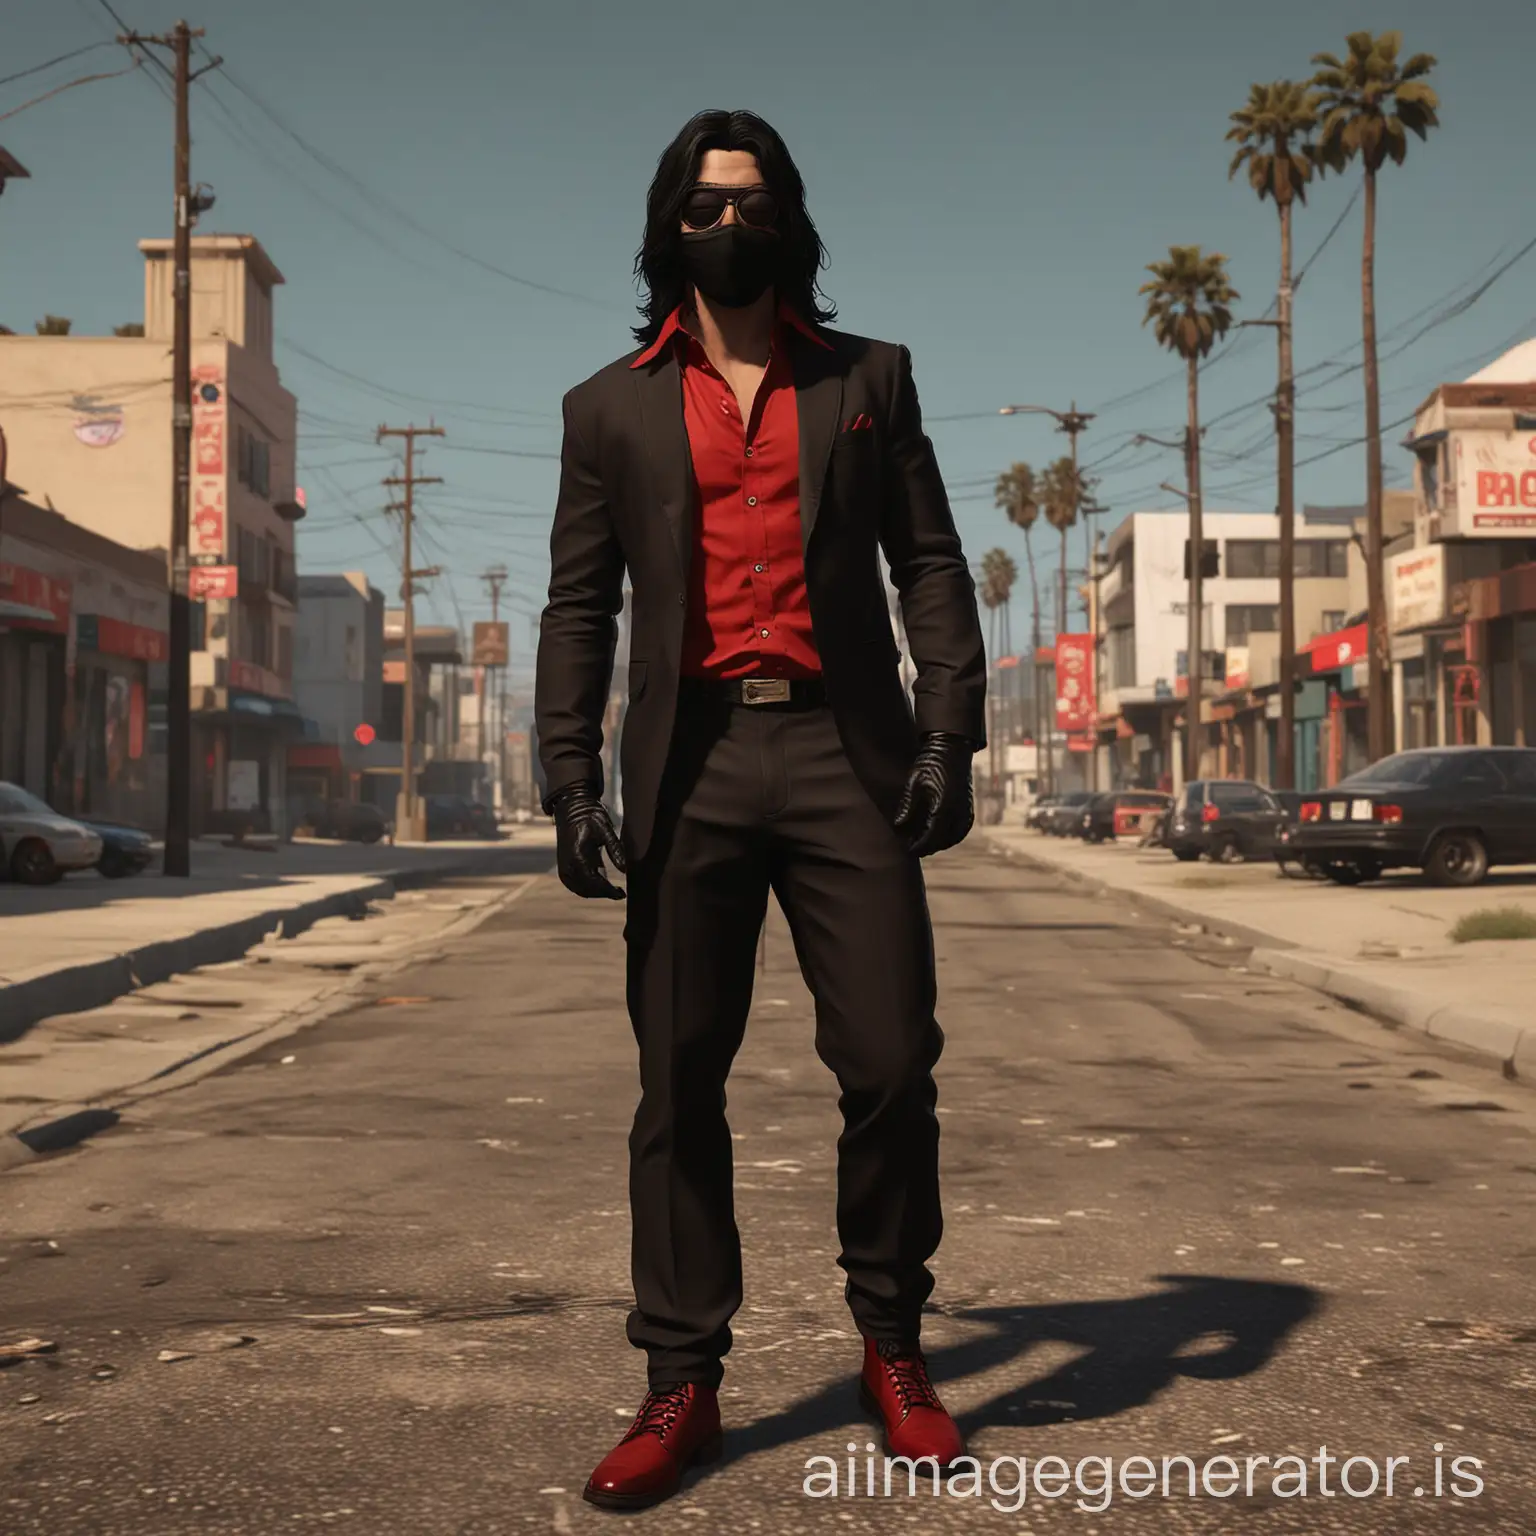 Vollmond-Mysterious-Figure-in-Red-Shirt-and-Black-Suit-with-GTA-Style